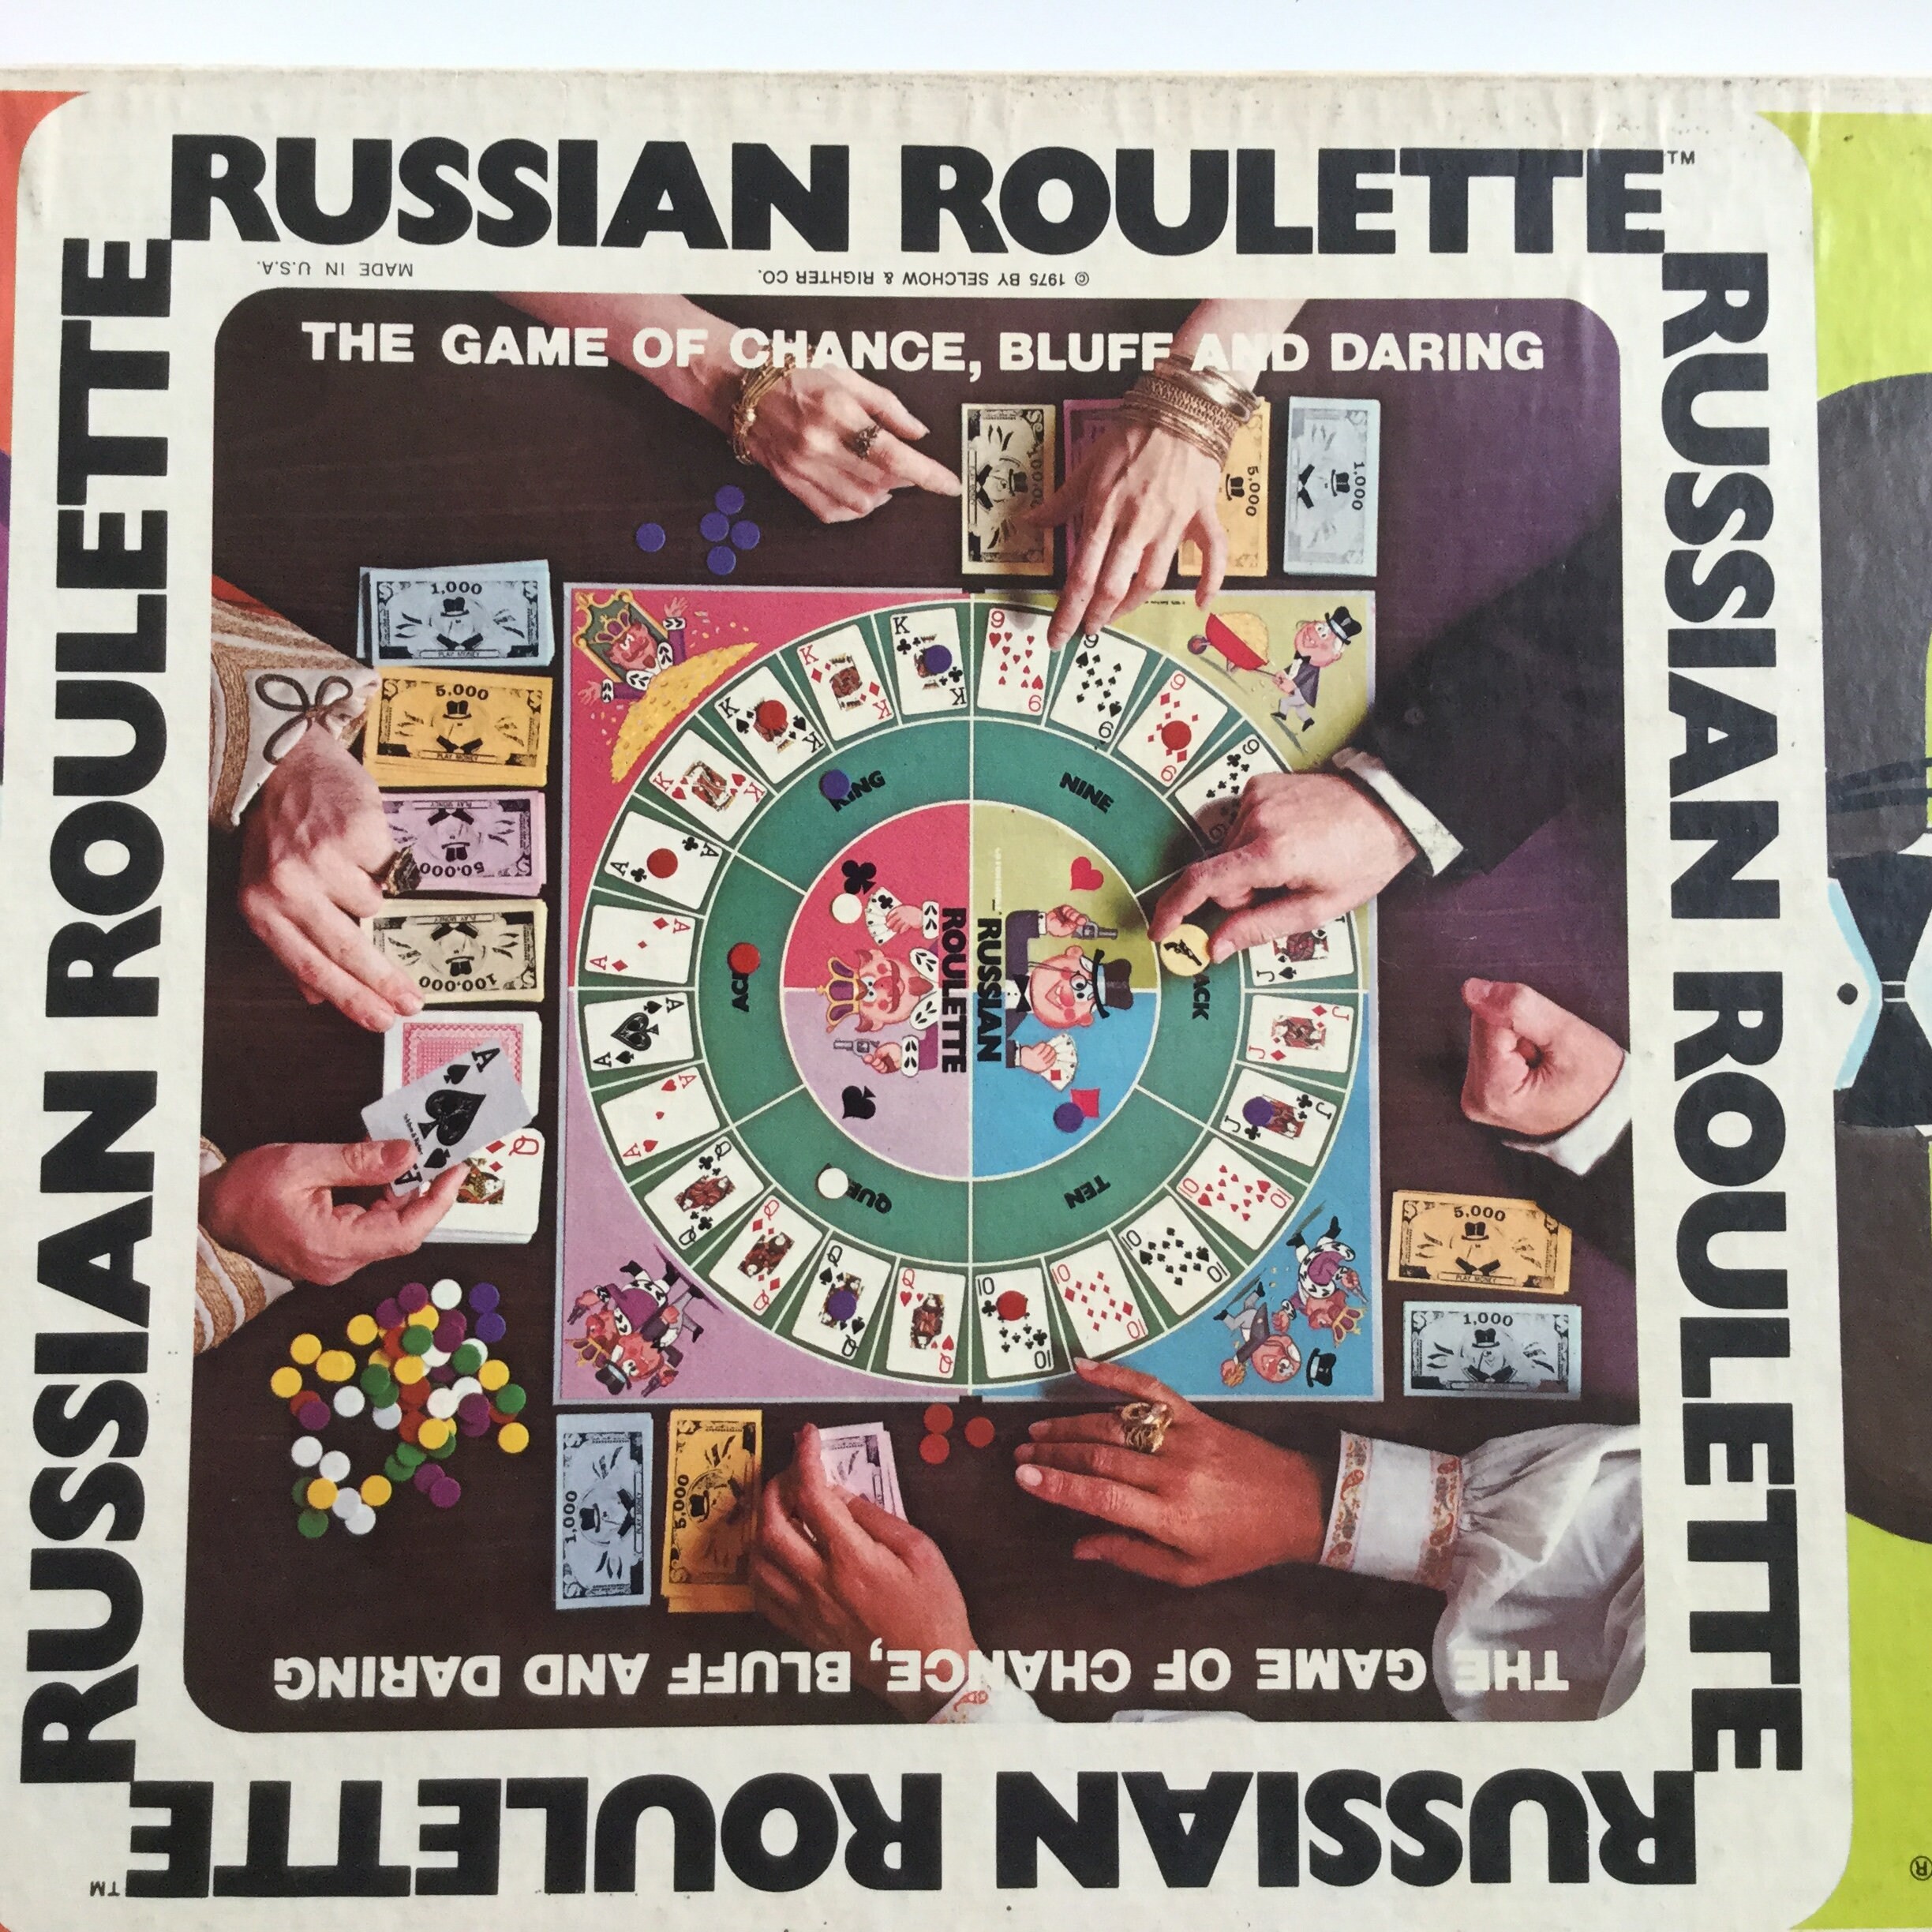 Buy Russian Roulette (1975 Film) by unknown at Low Price in India